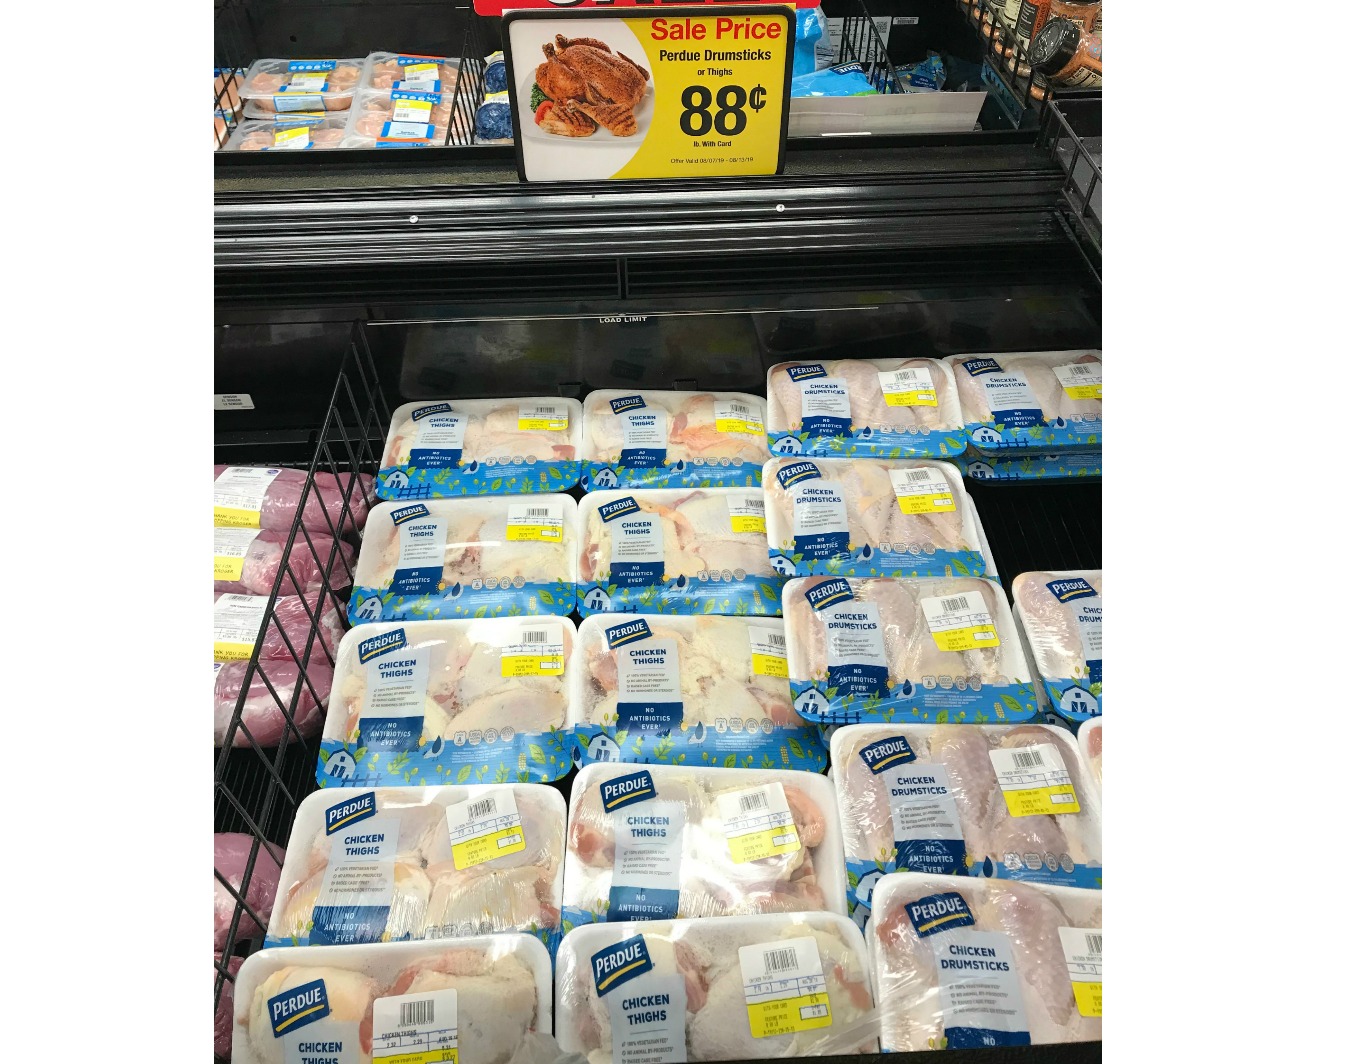 TODAY ONLY! BIG Savings on Perdue Fresh Chicken Thighs and Drumsticks ...